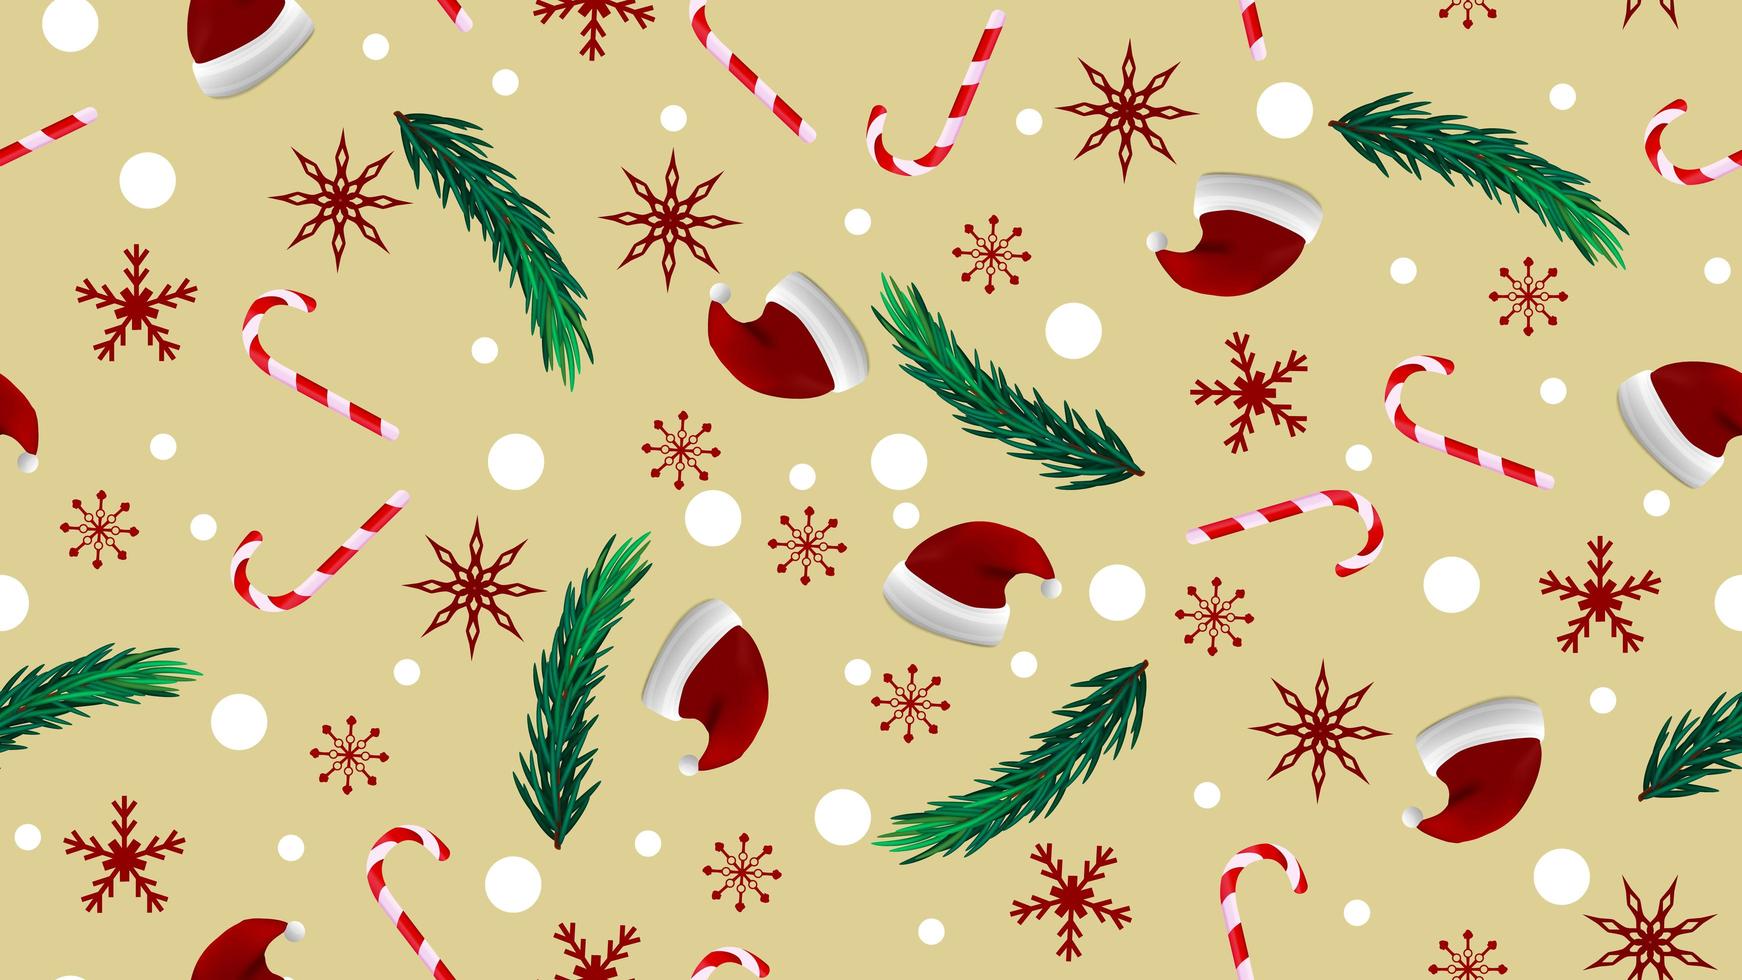 Christmas beige seamless texture with Santa Claus hat, Christmas tree branches, candy cane and snowflake vector